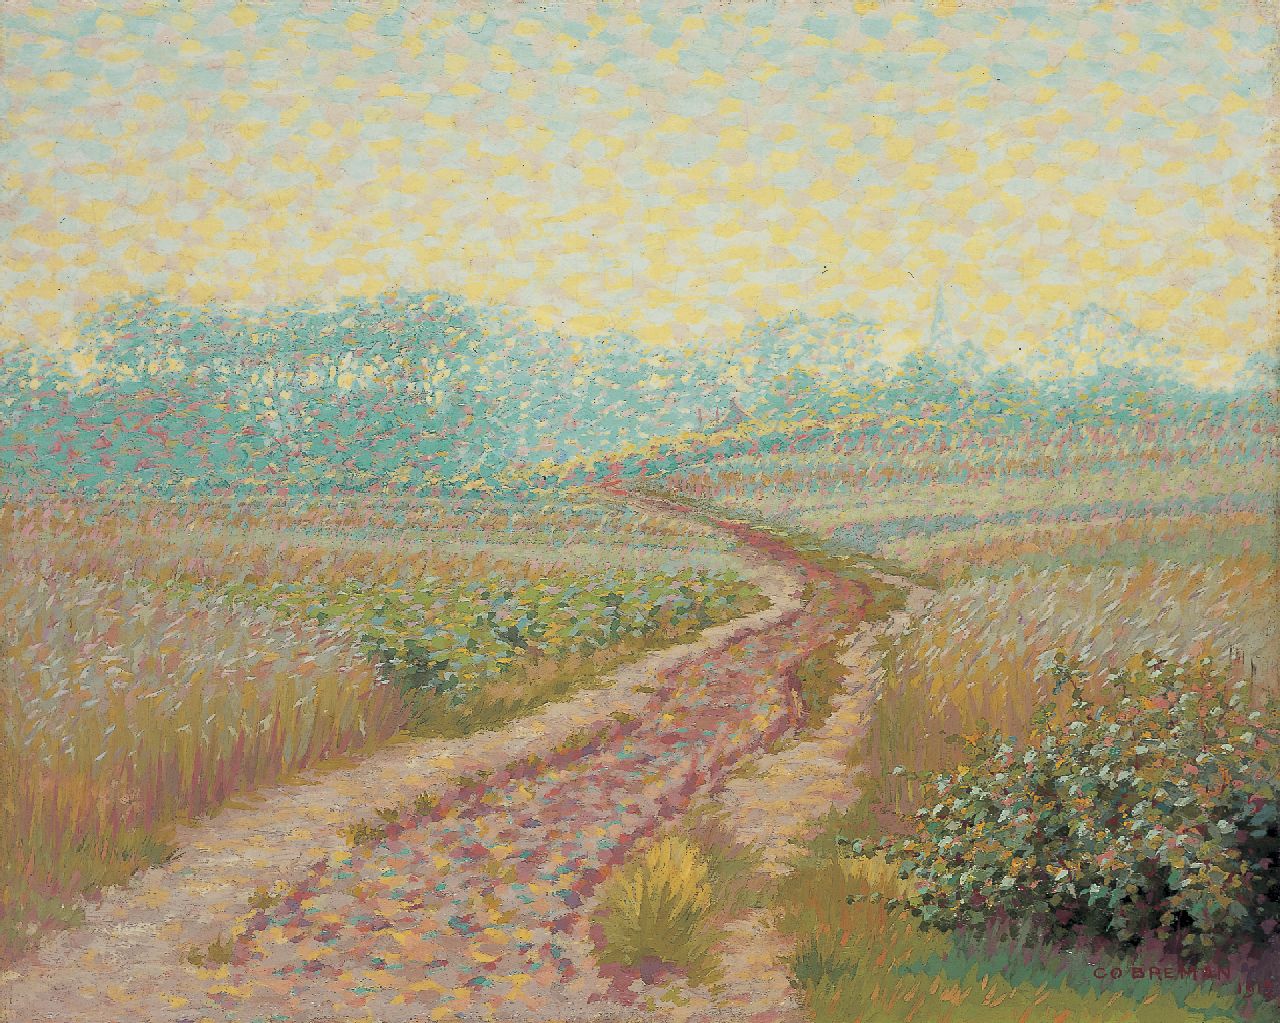 Breman A.J.  | Ahazueros Jacobus 'Co' Breman, The 'Eng', Blaricum in summer, oil on canvas 46.0 x 56.0 cm, signed l.r. and dated 1912